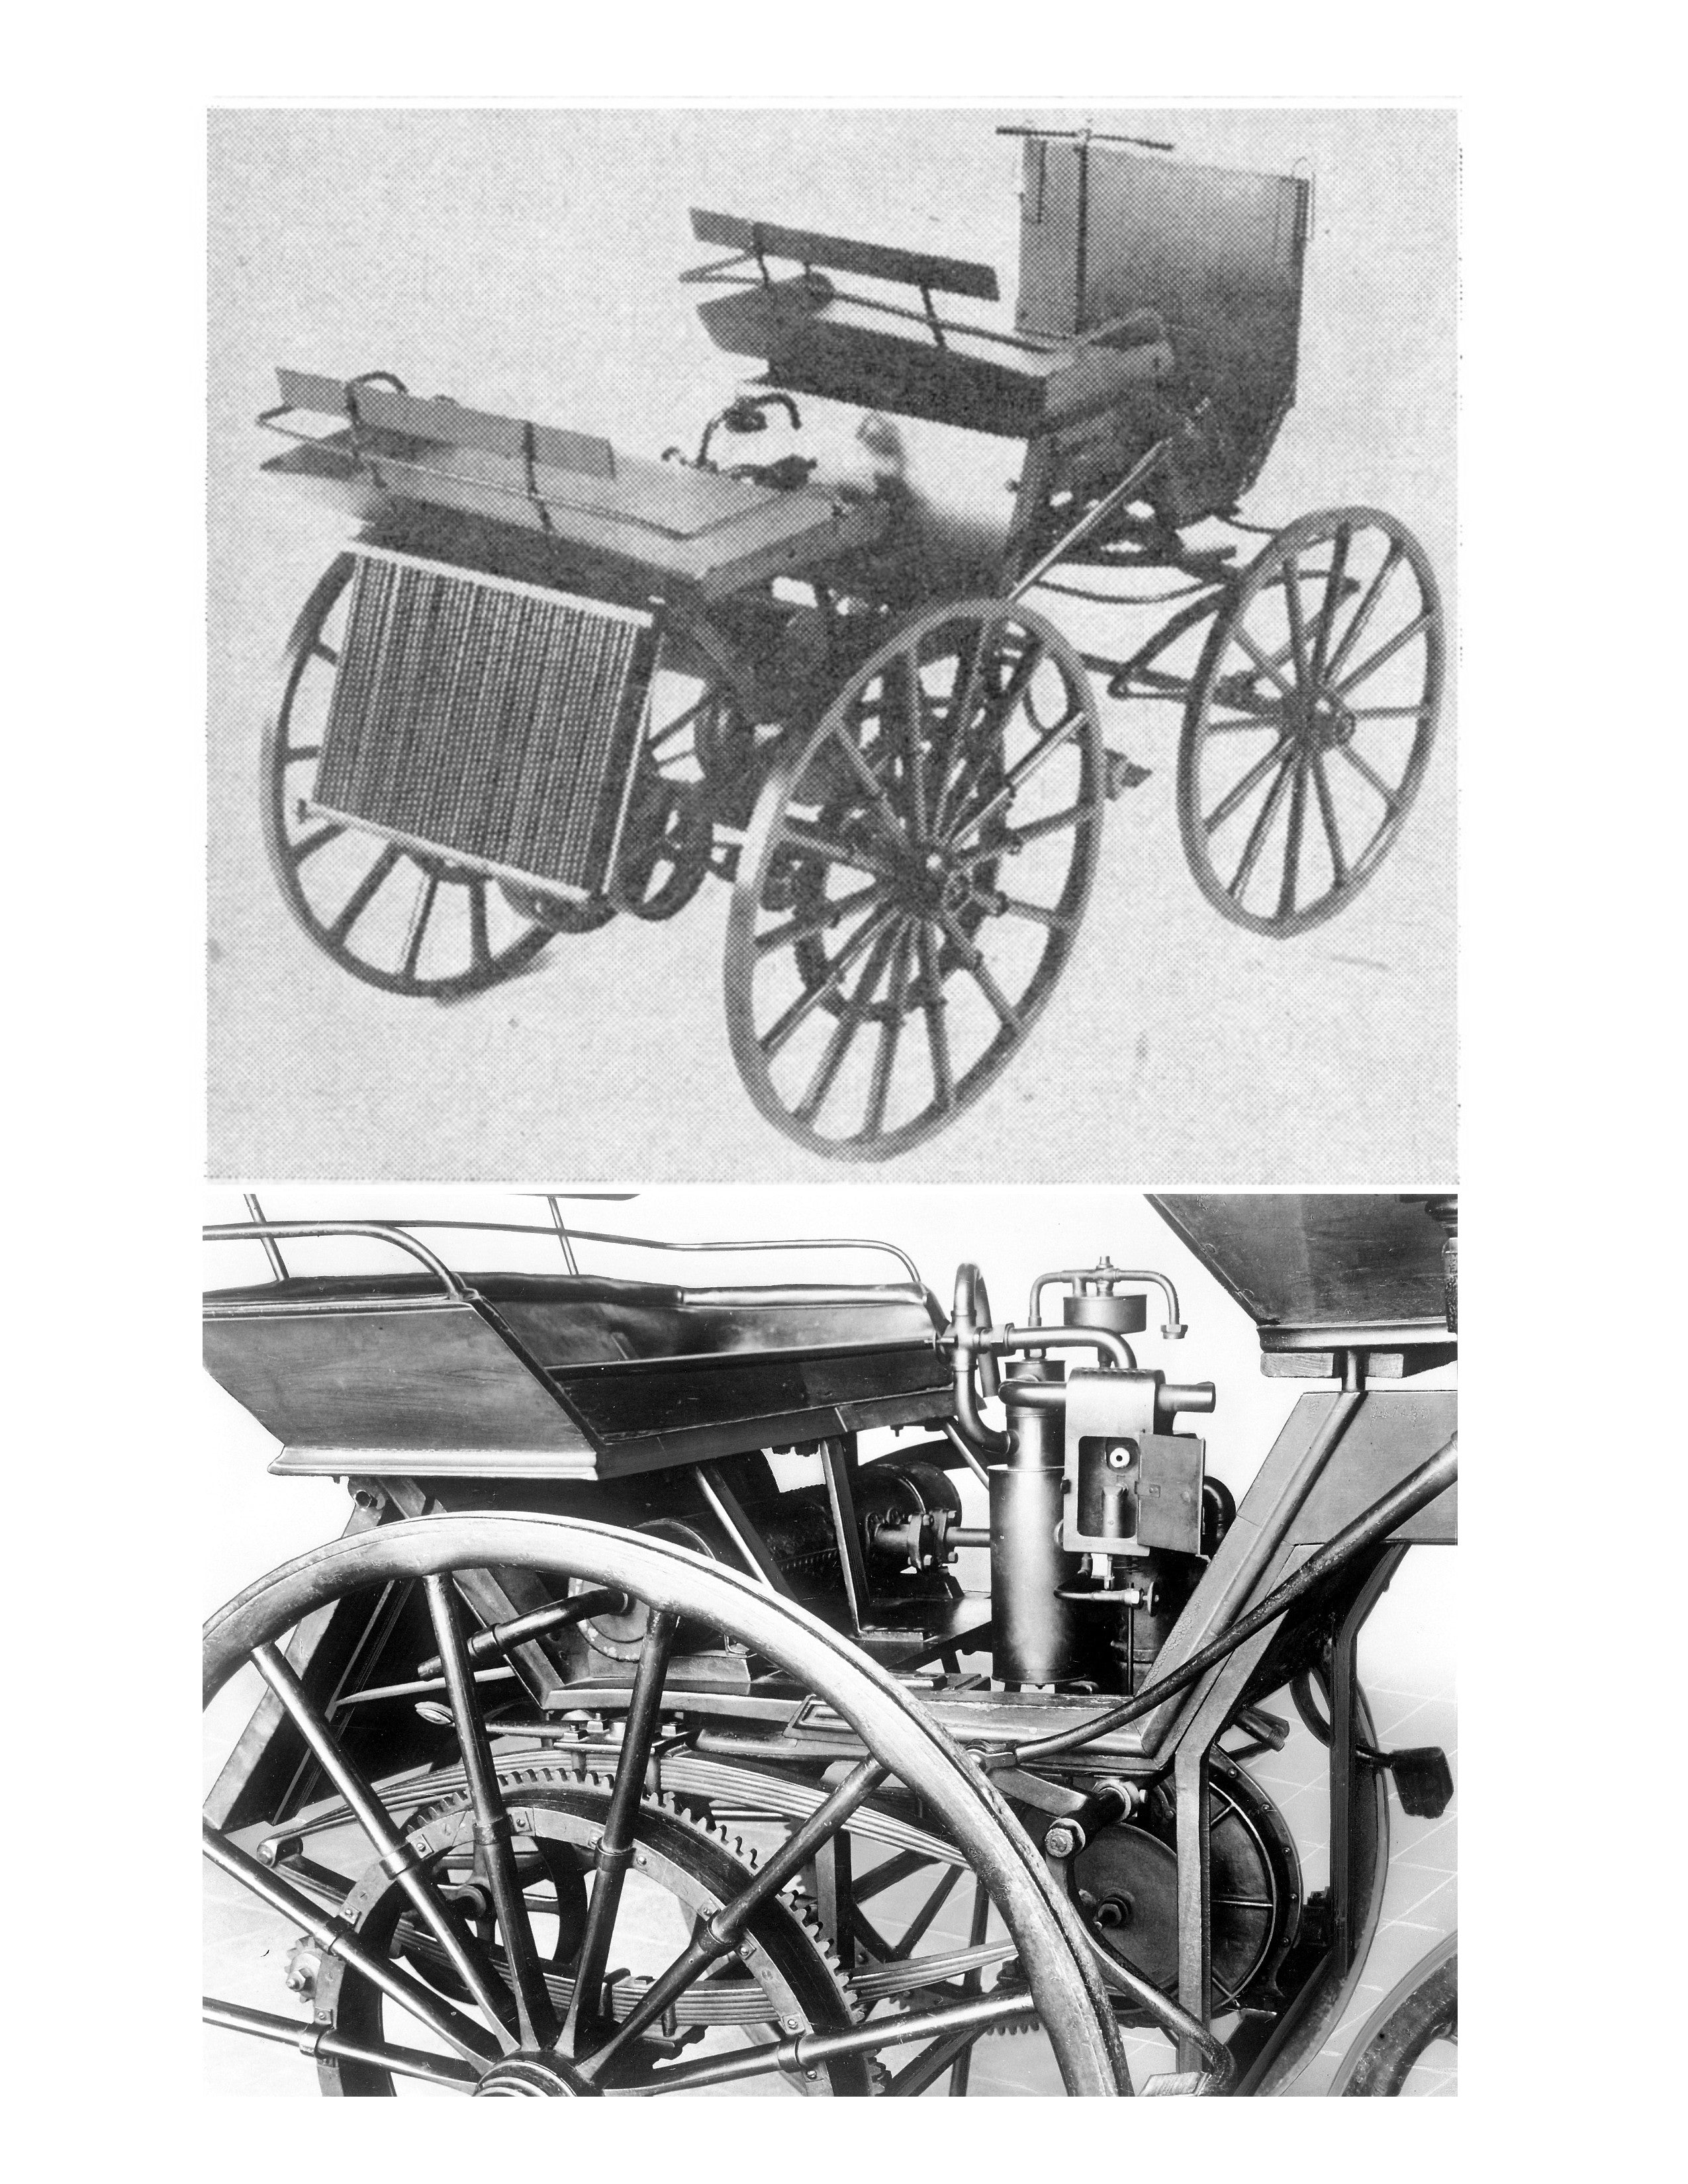 printed full size drawings 1886 daimler scale 1:12  length 8”  width 4 ¼”  height 5